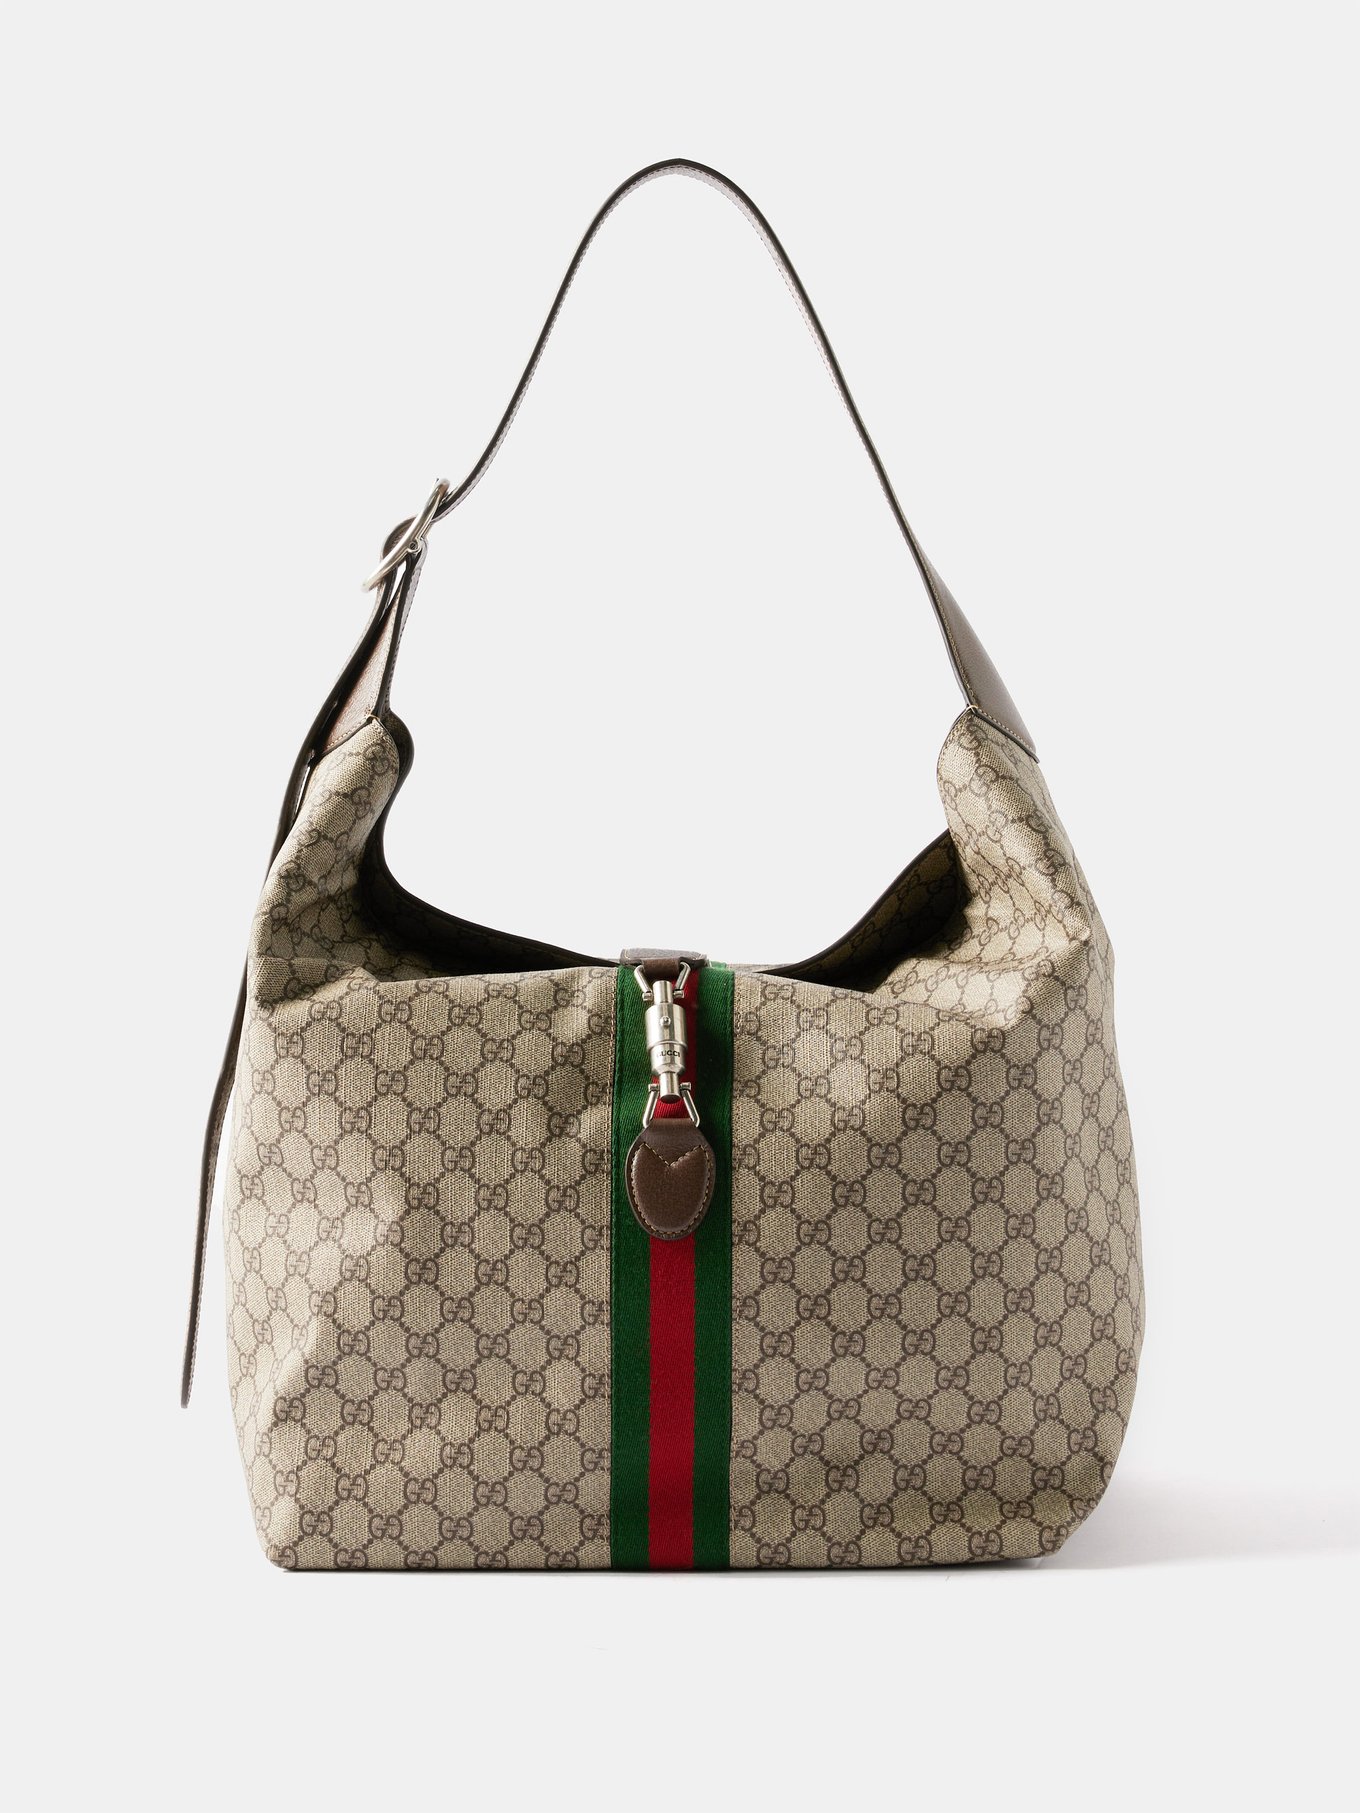 Gucci Beige/Brown GG Supreme Canvas and Leather Clasp Crossbody